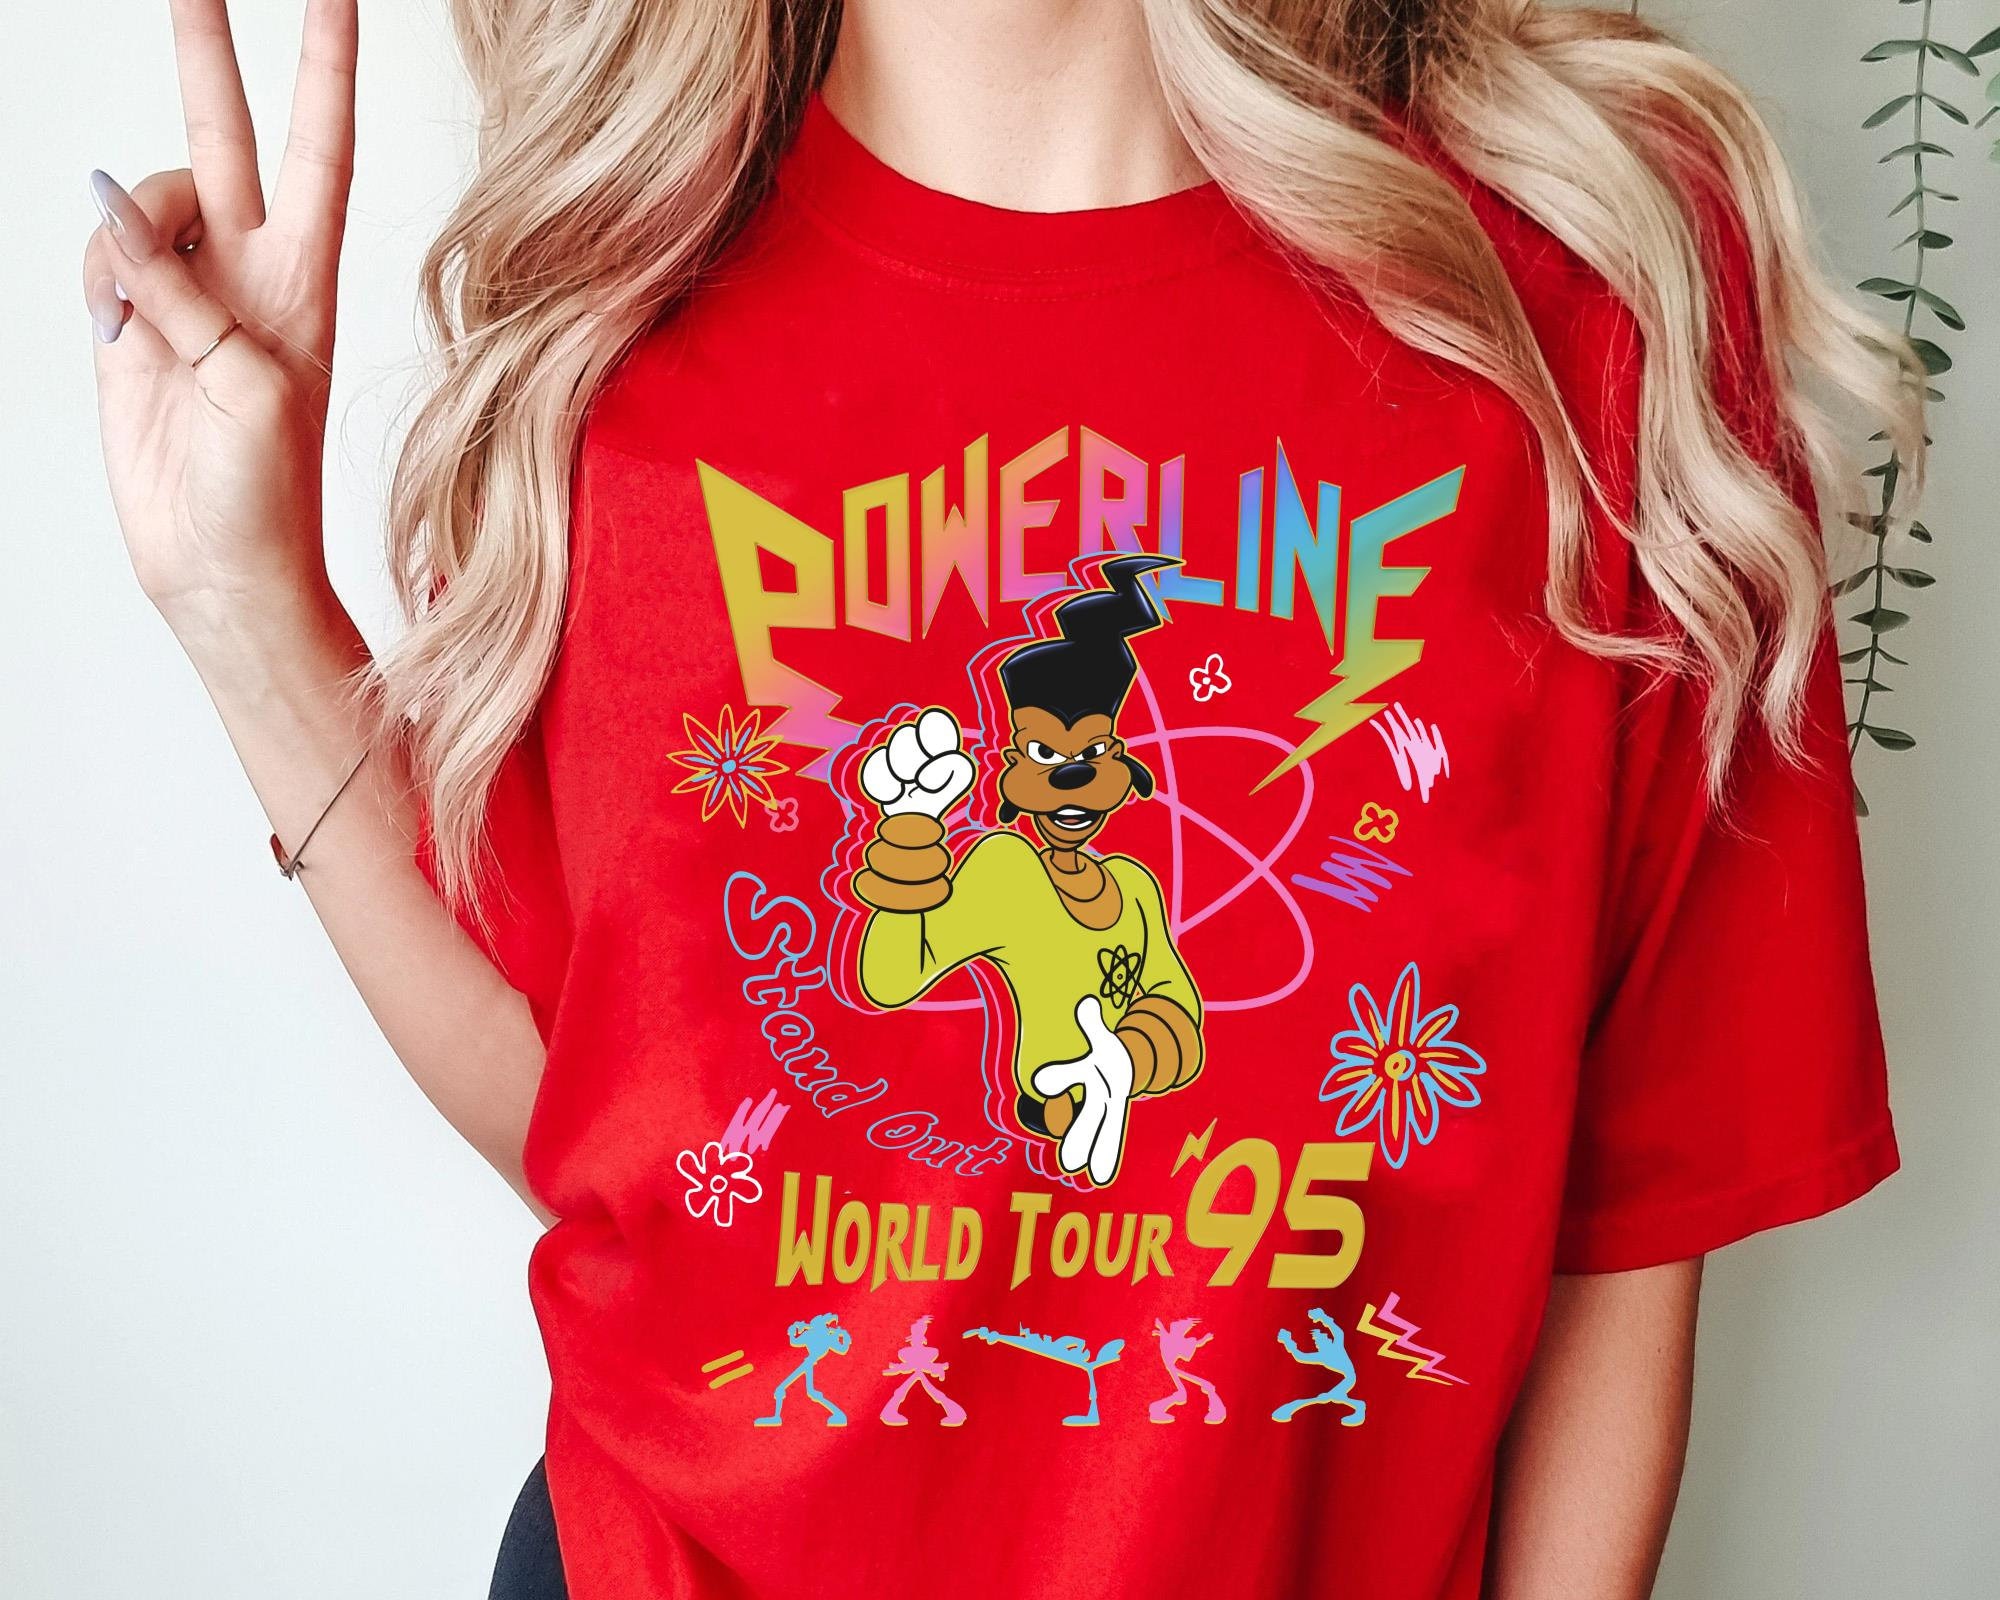 Retro Powerline Stand Out World Tour 95  T-shirt, A Goofy Movie Disney Front And Back Shirt, Disneyland Family Trip